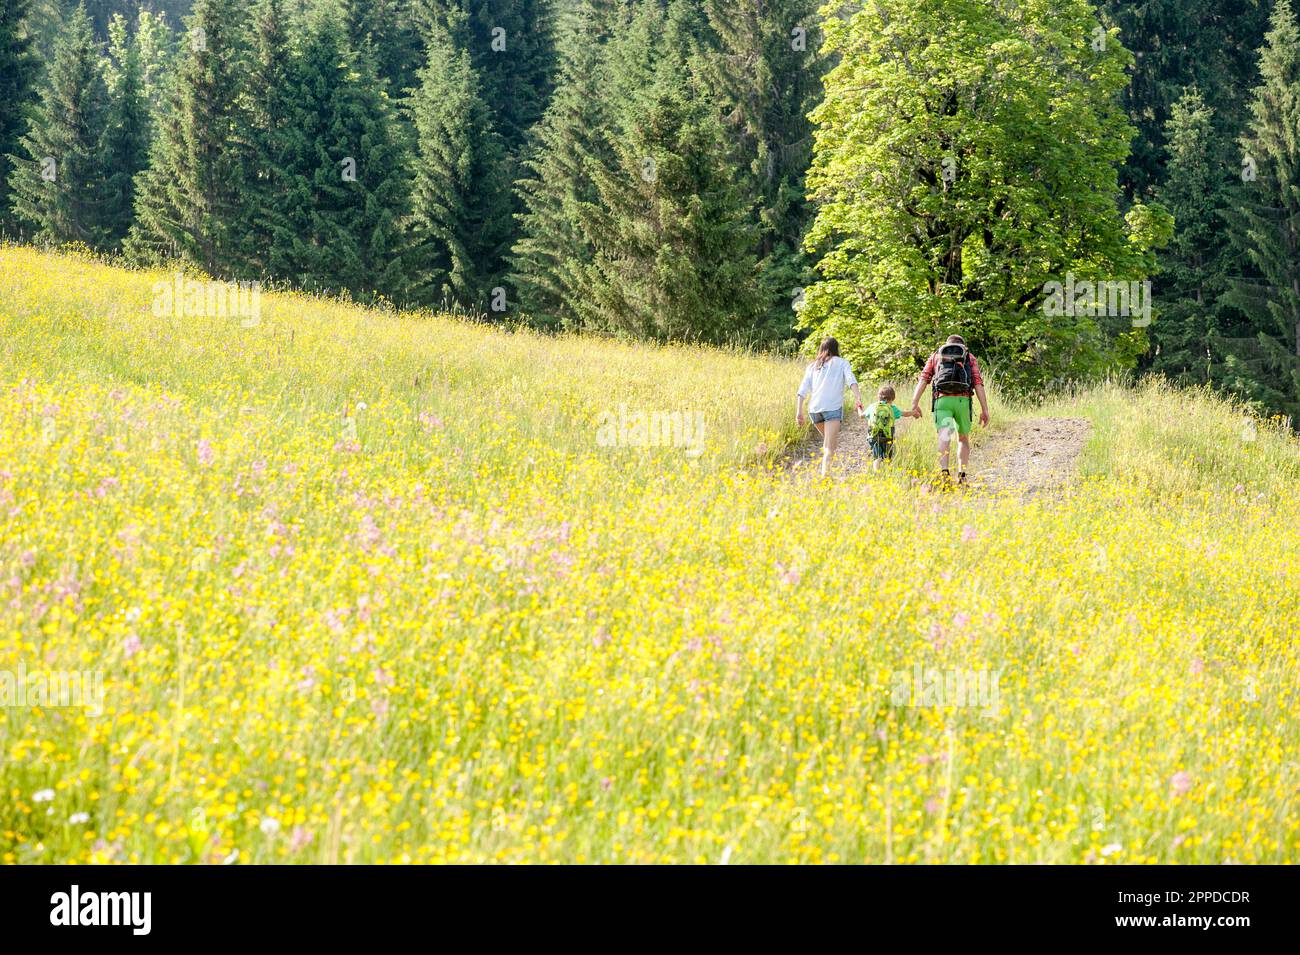 Man and woman holding hands and walking with son in front of trees Stock Photo